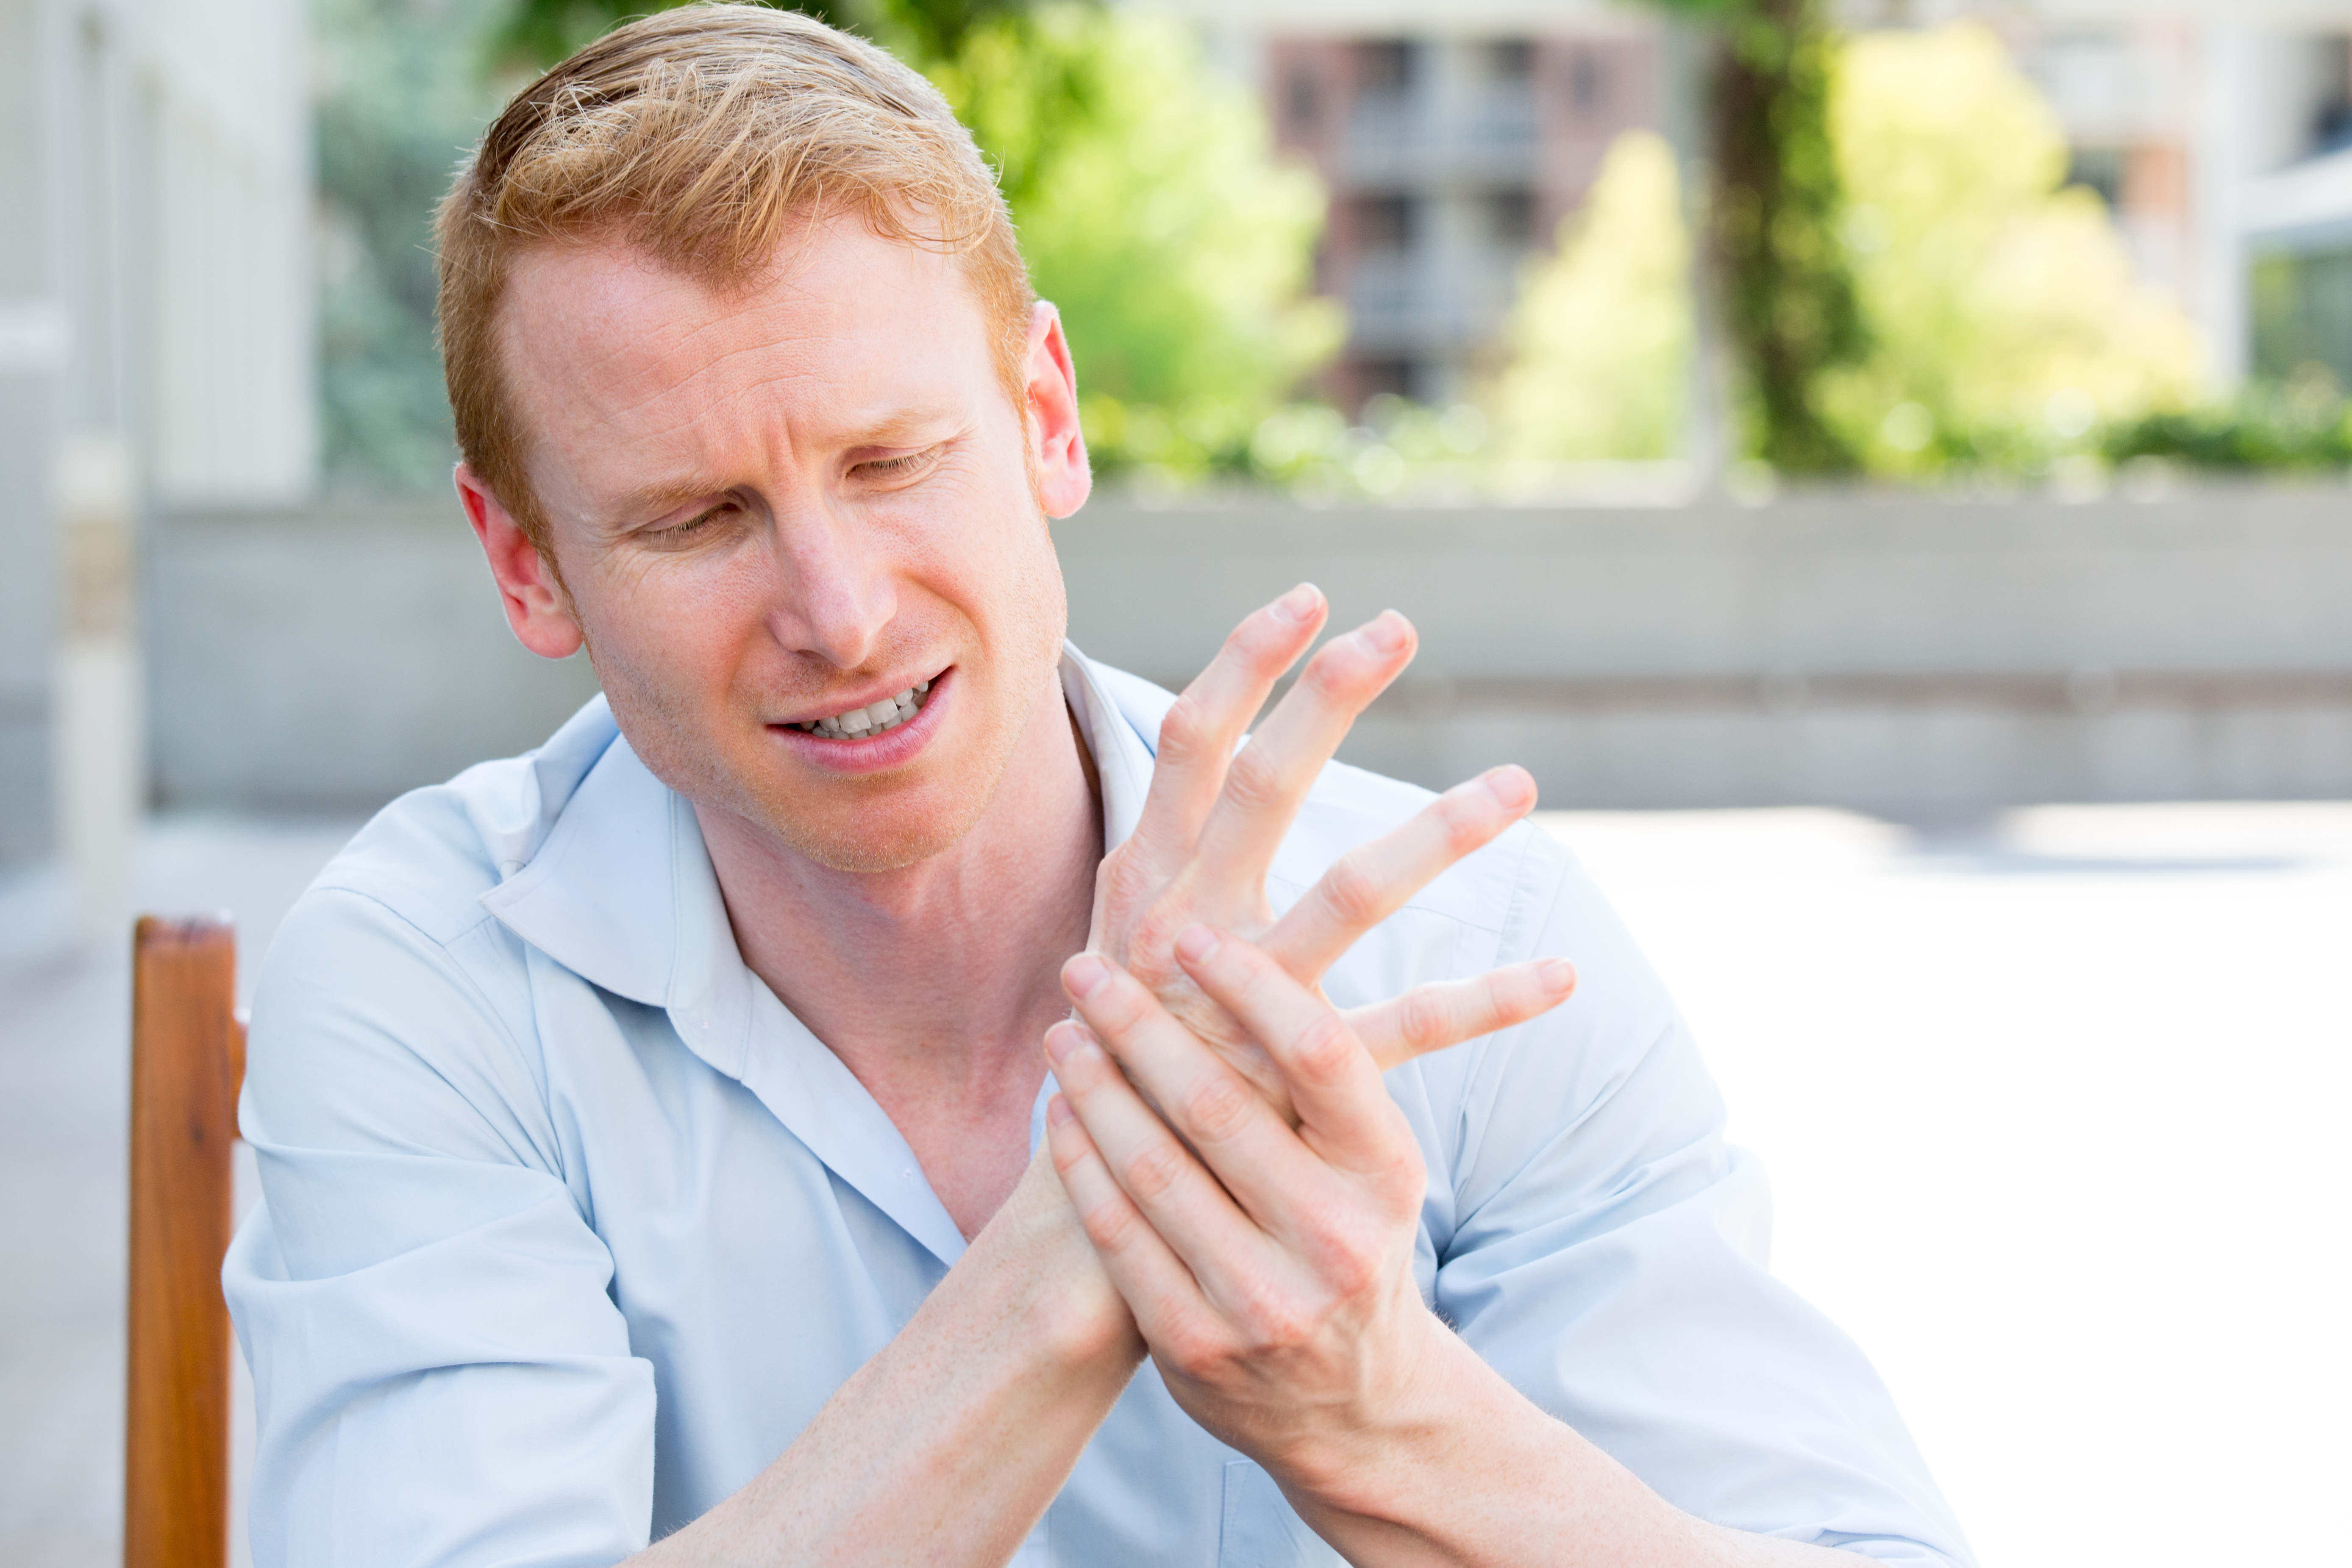 Closeup portrait, young man having acute bad joint pain in his hands, wrtier's cramp, massaging them, sitting in chair, isolated outdoors background